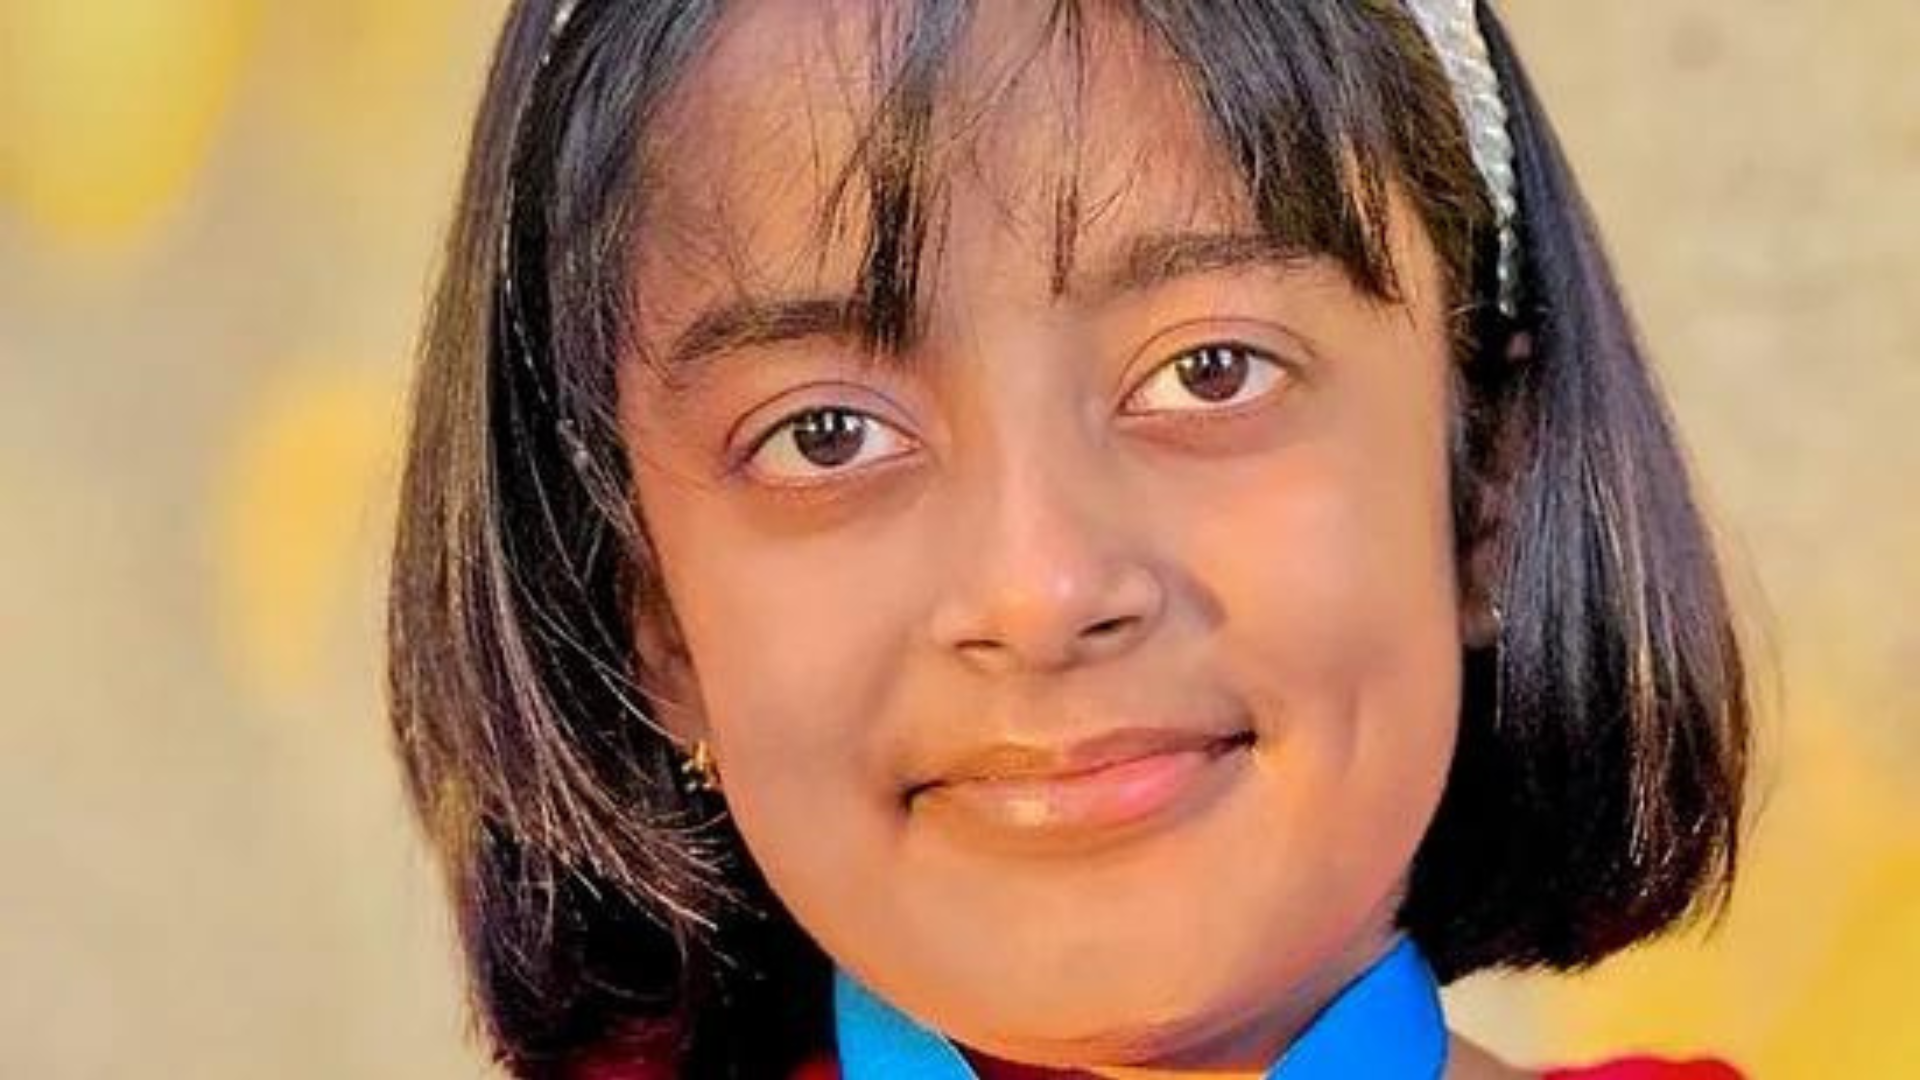 9-Year-Old Indian American Girl Wows Experts as World’s Brightest Students - Post Image